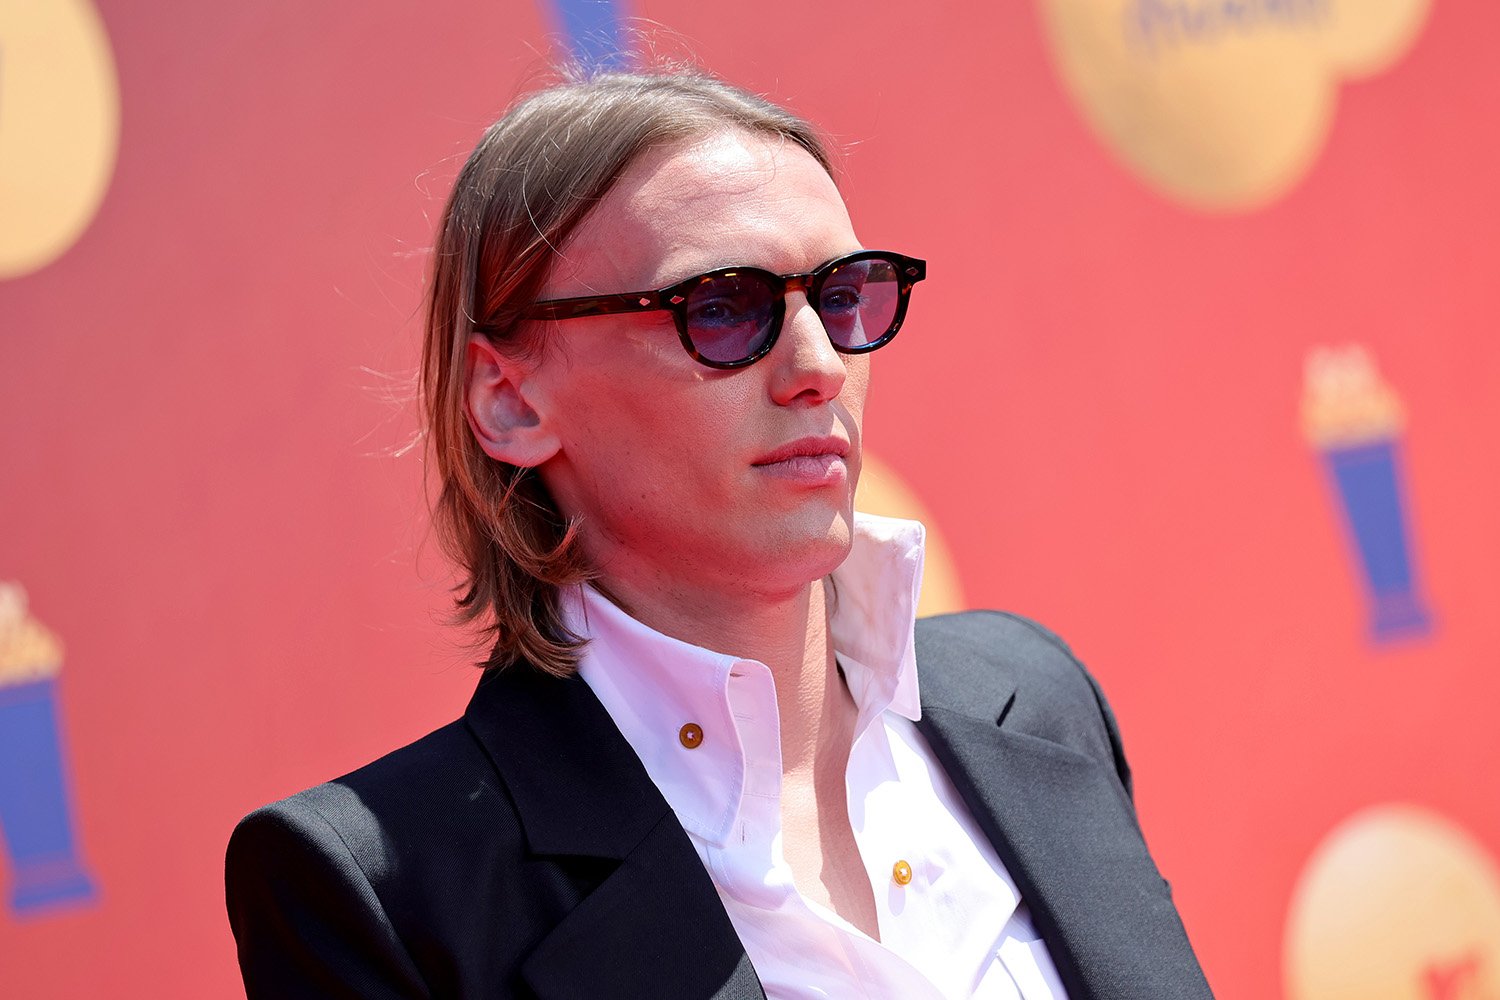 Who Plays 001 In Stranger Things? Actor Jamie Campell Bower